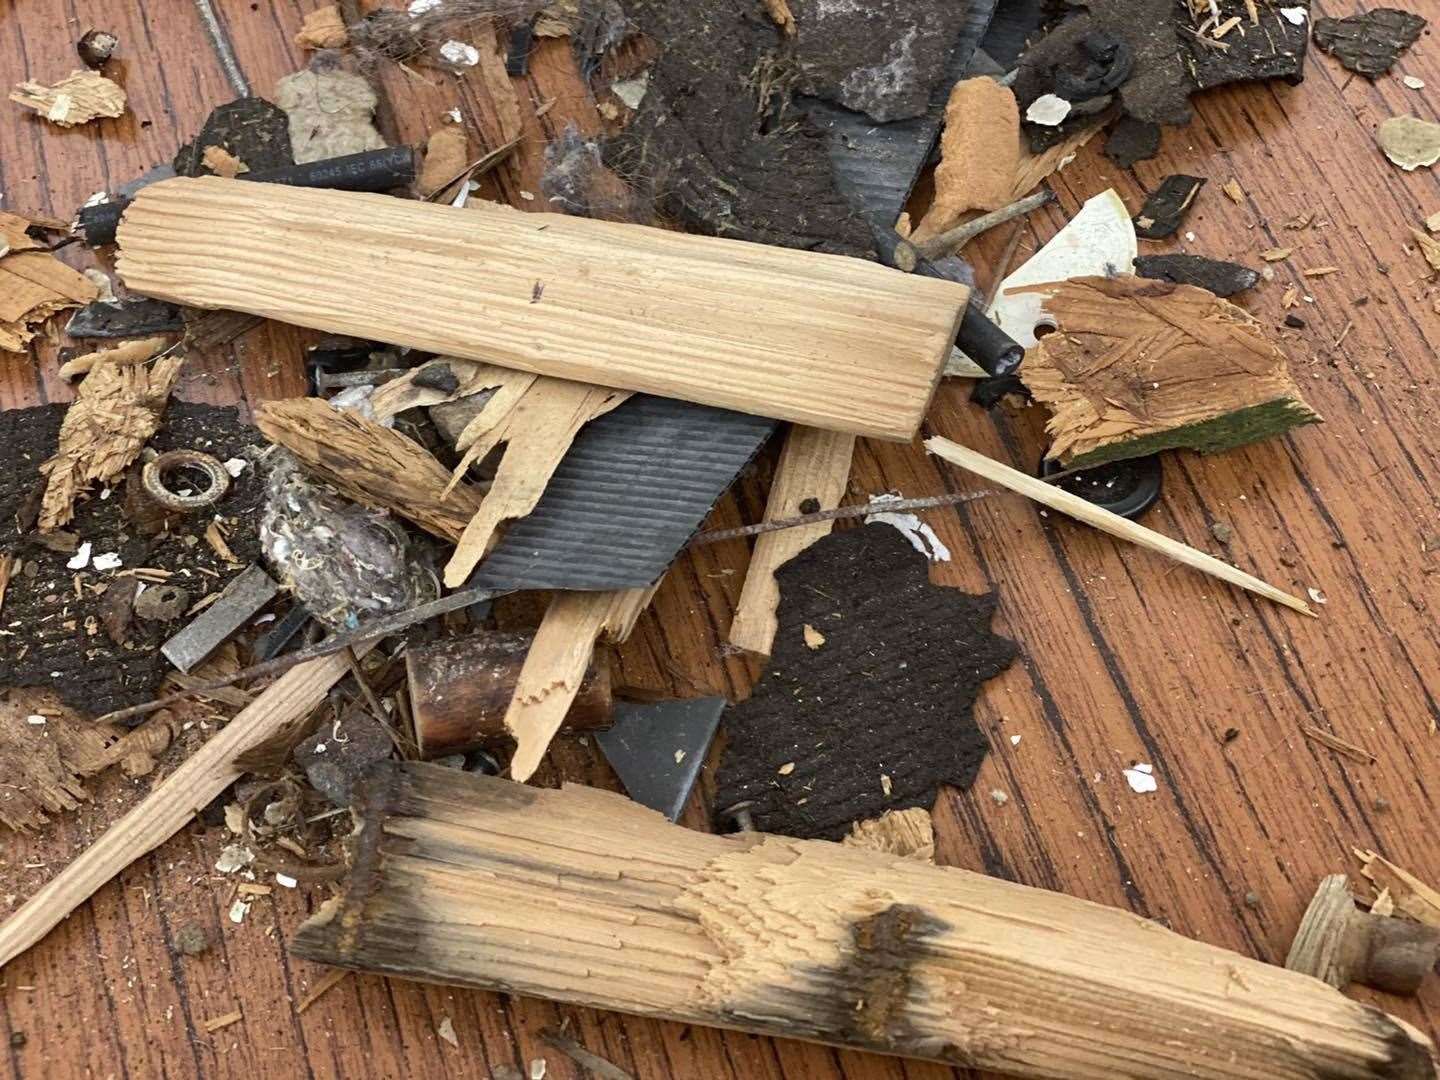 Some of the "small" debris found to have fallen from the roof into the swimming pool